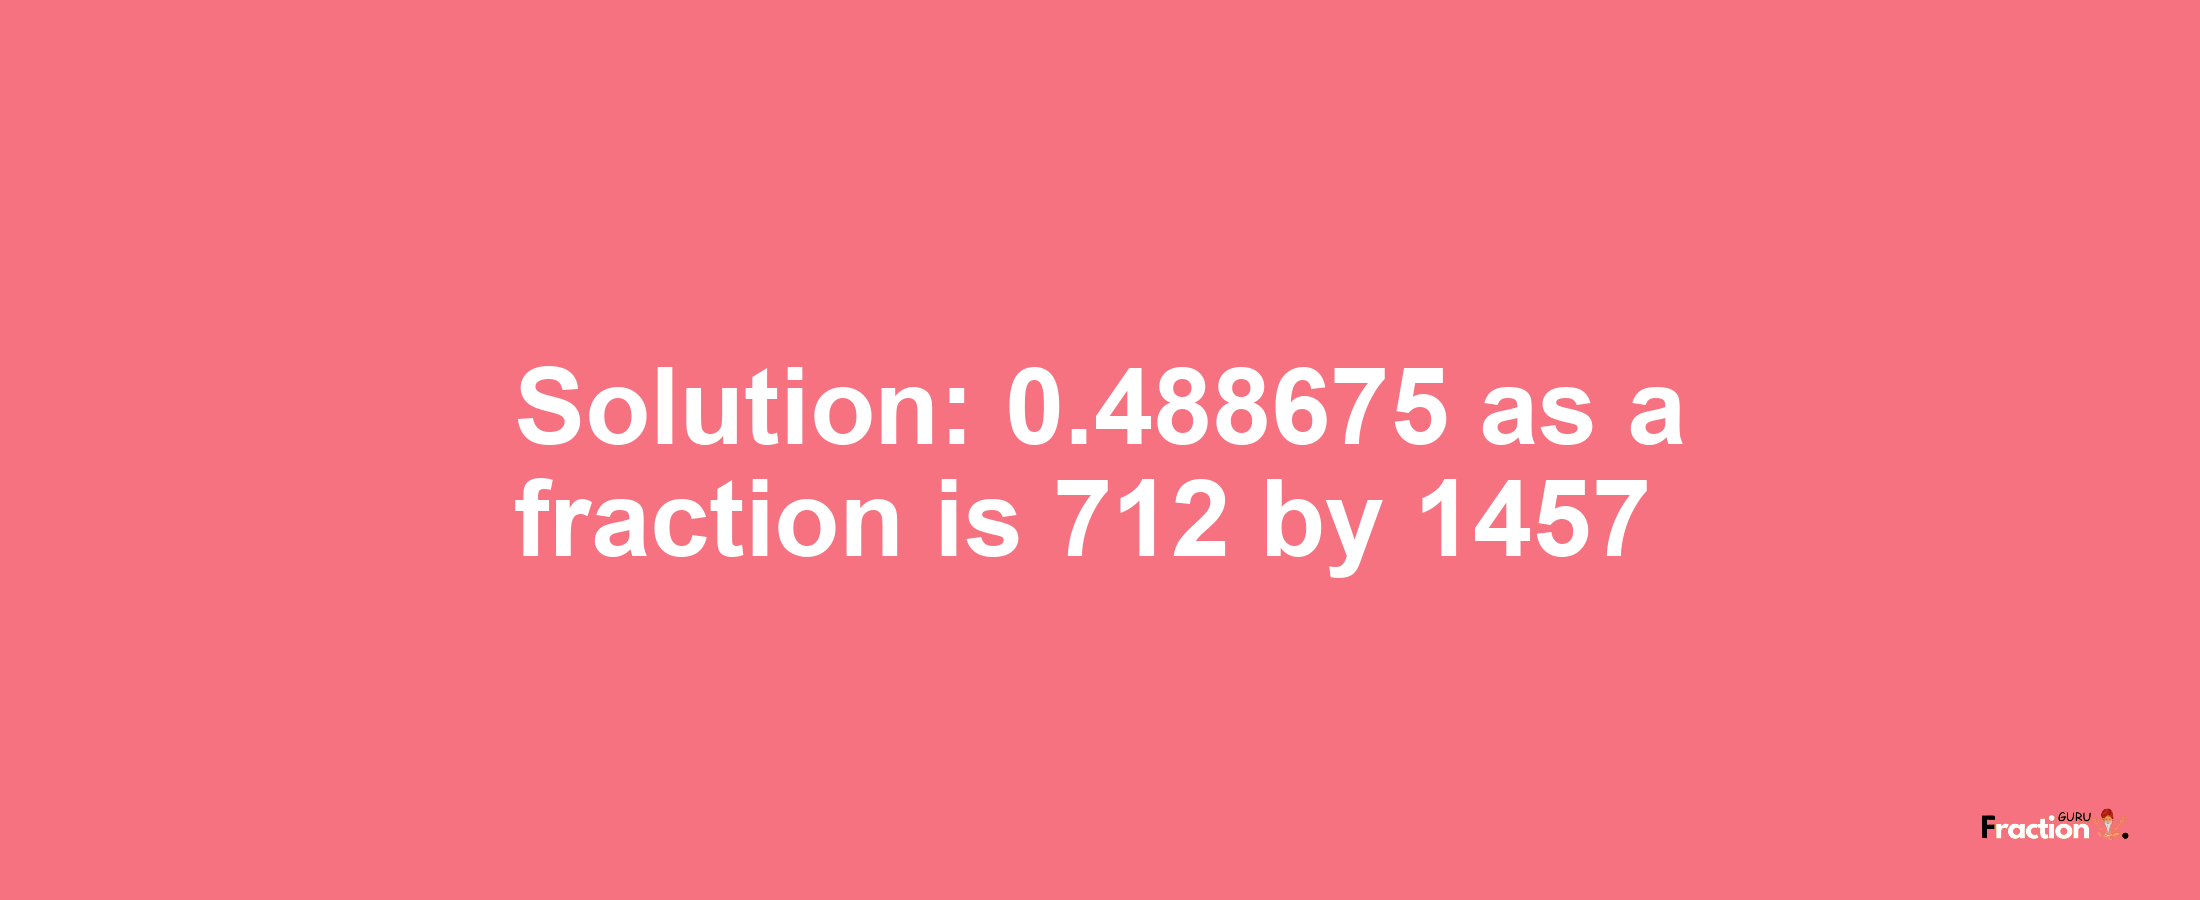 Solution:0.488675 as a fraction is 712/1457